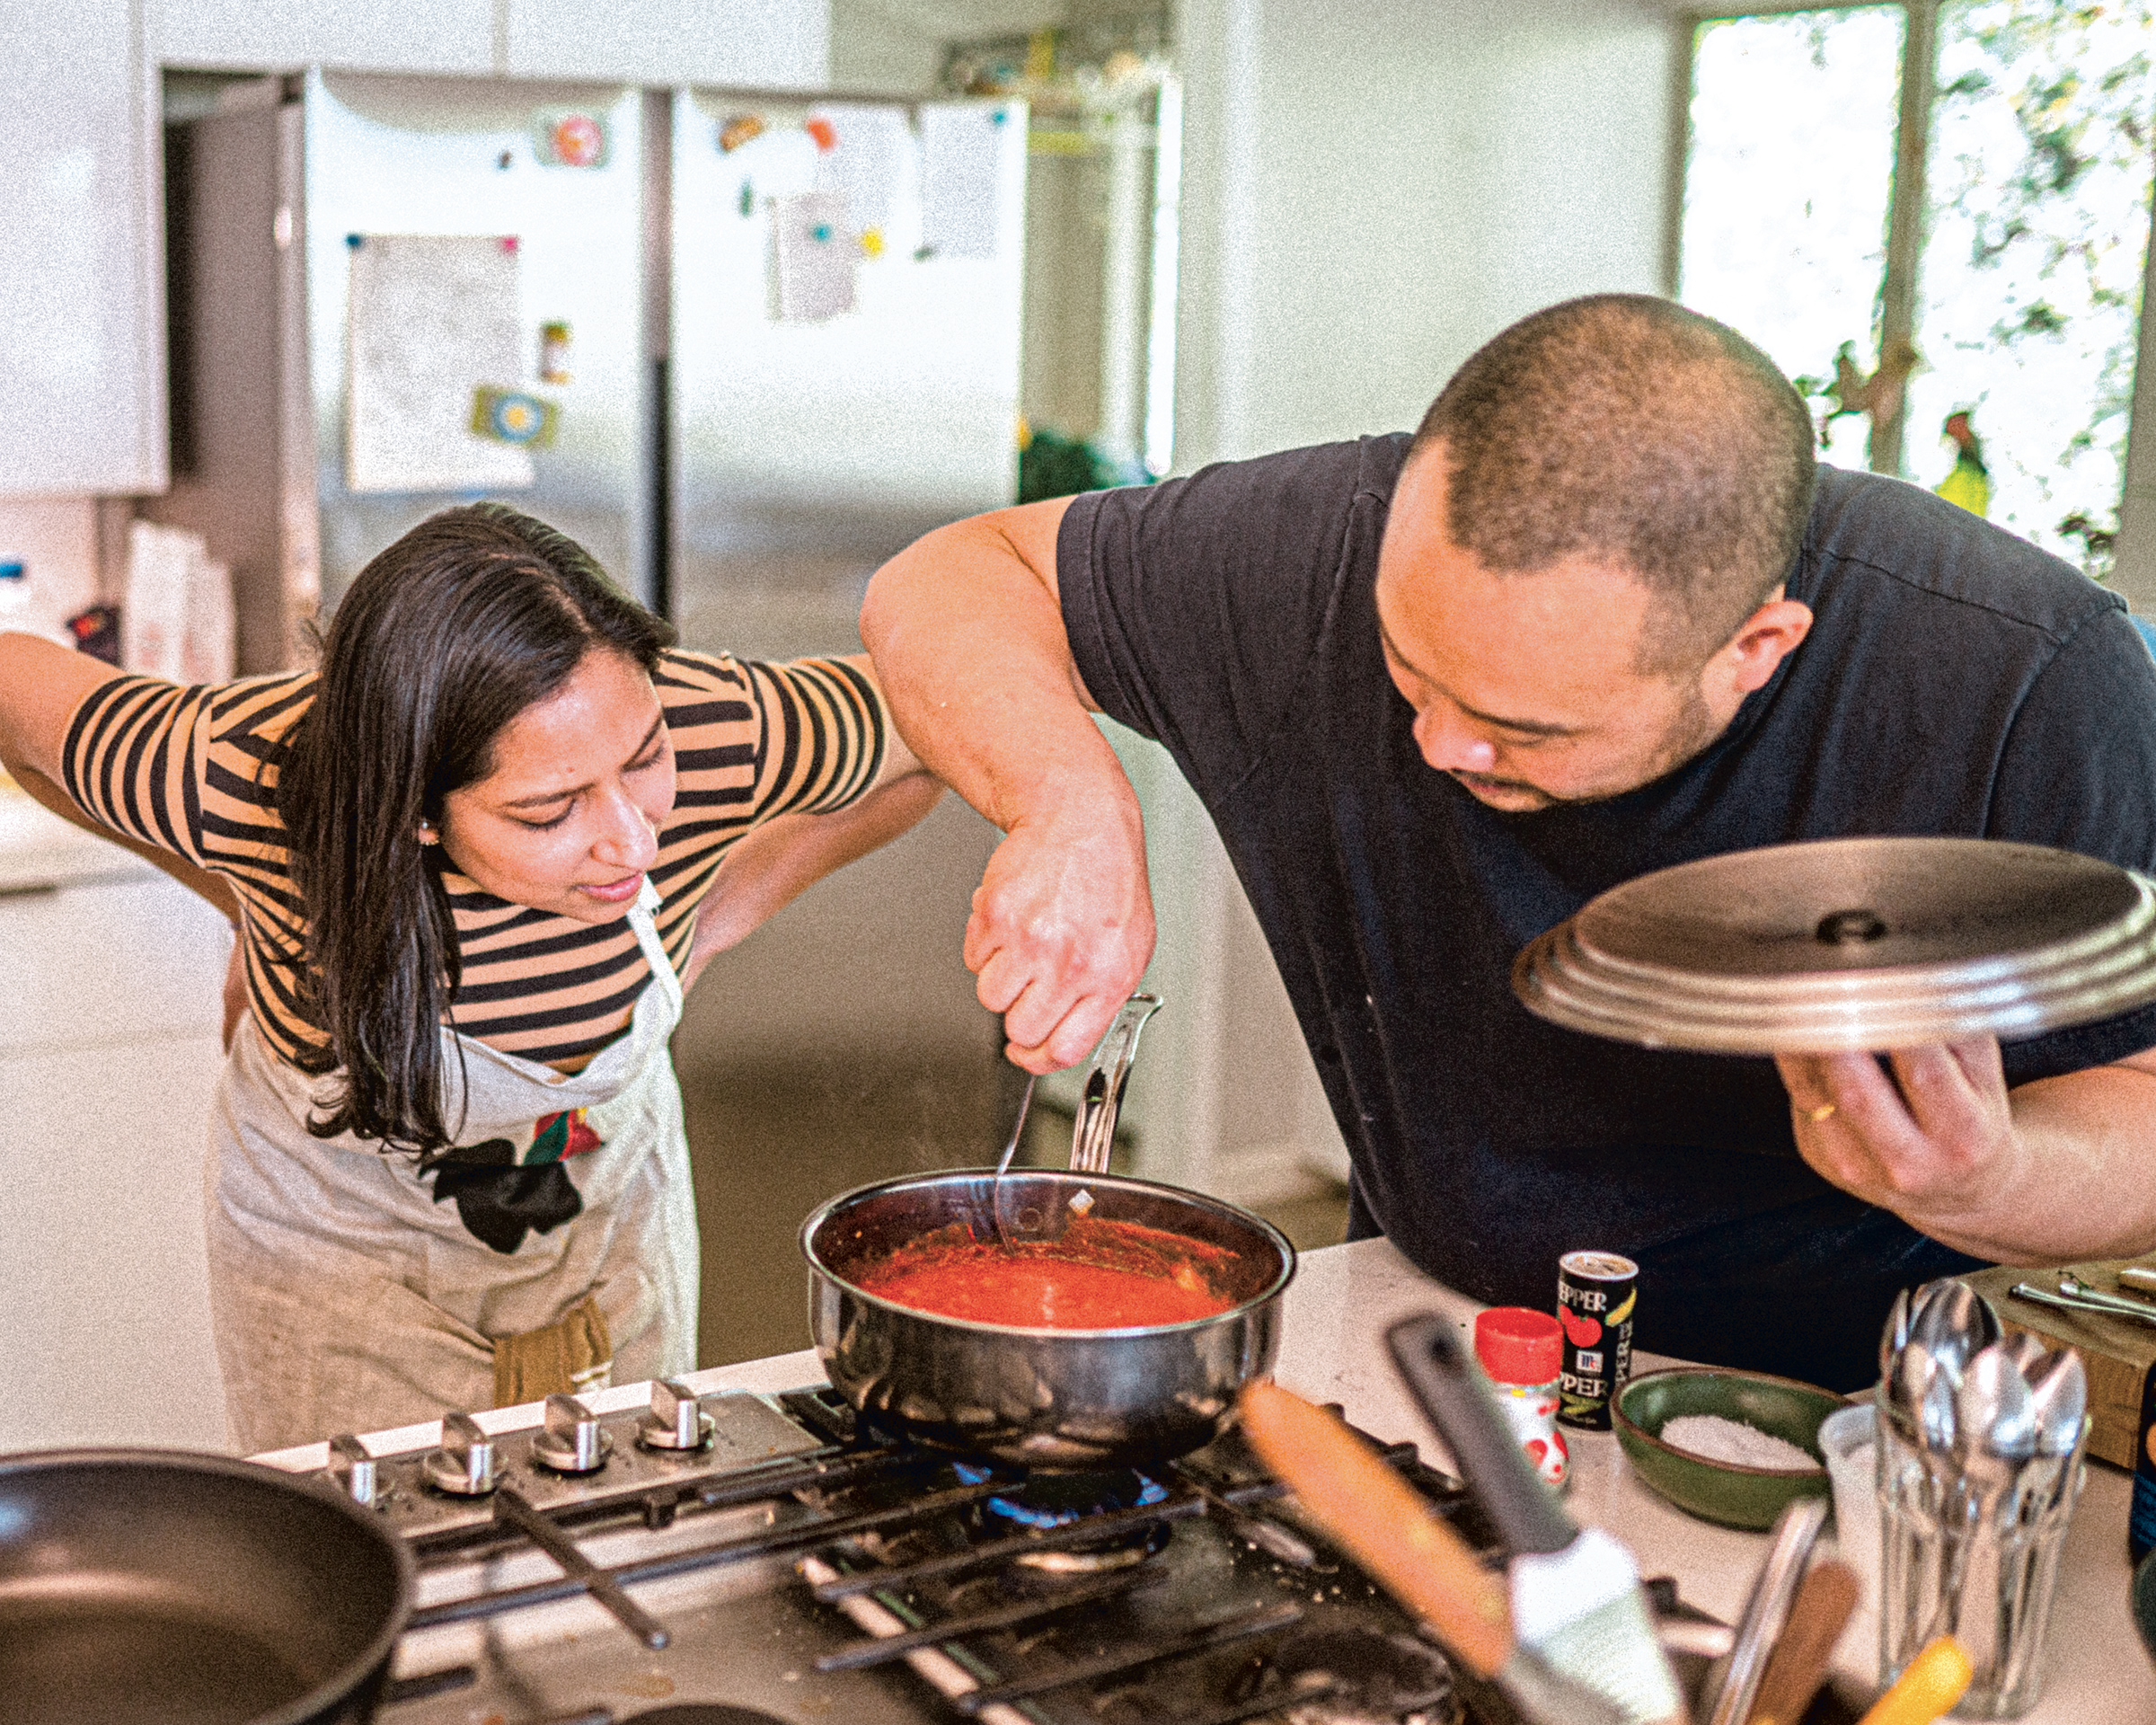 David Chang and Priya Krishna are set to publish their book 'Cooking at Home: Or, How I Learned to Stop Worrying About Recipes,' on Oct. 26. (Horatio Baltz)